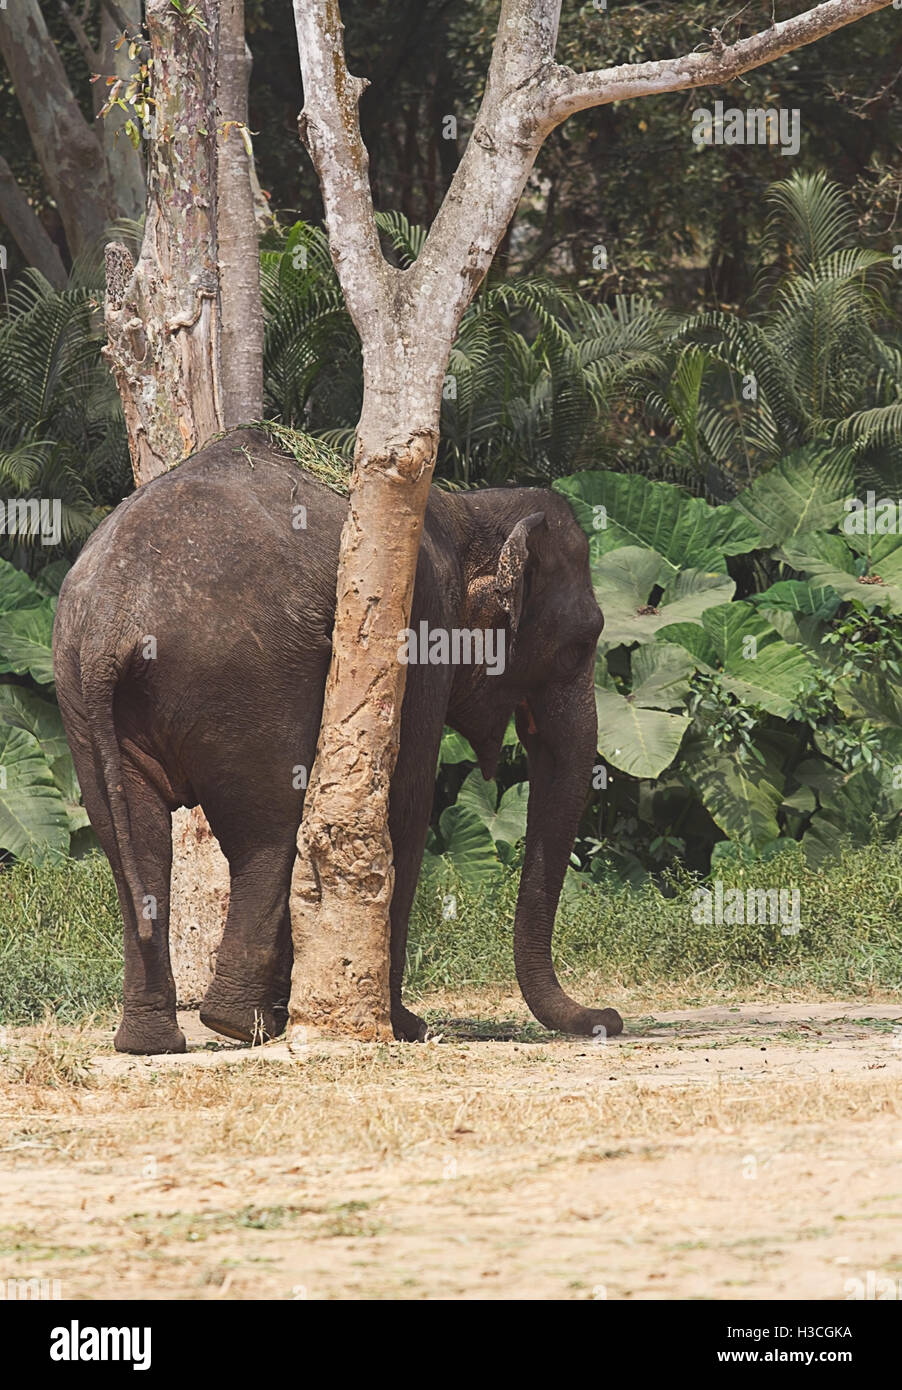 Photo of a young Indian elephant rubbing up against a tree Stock Photo